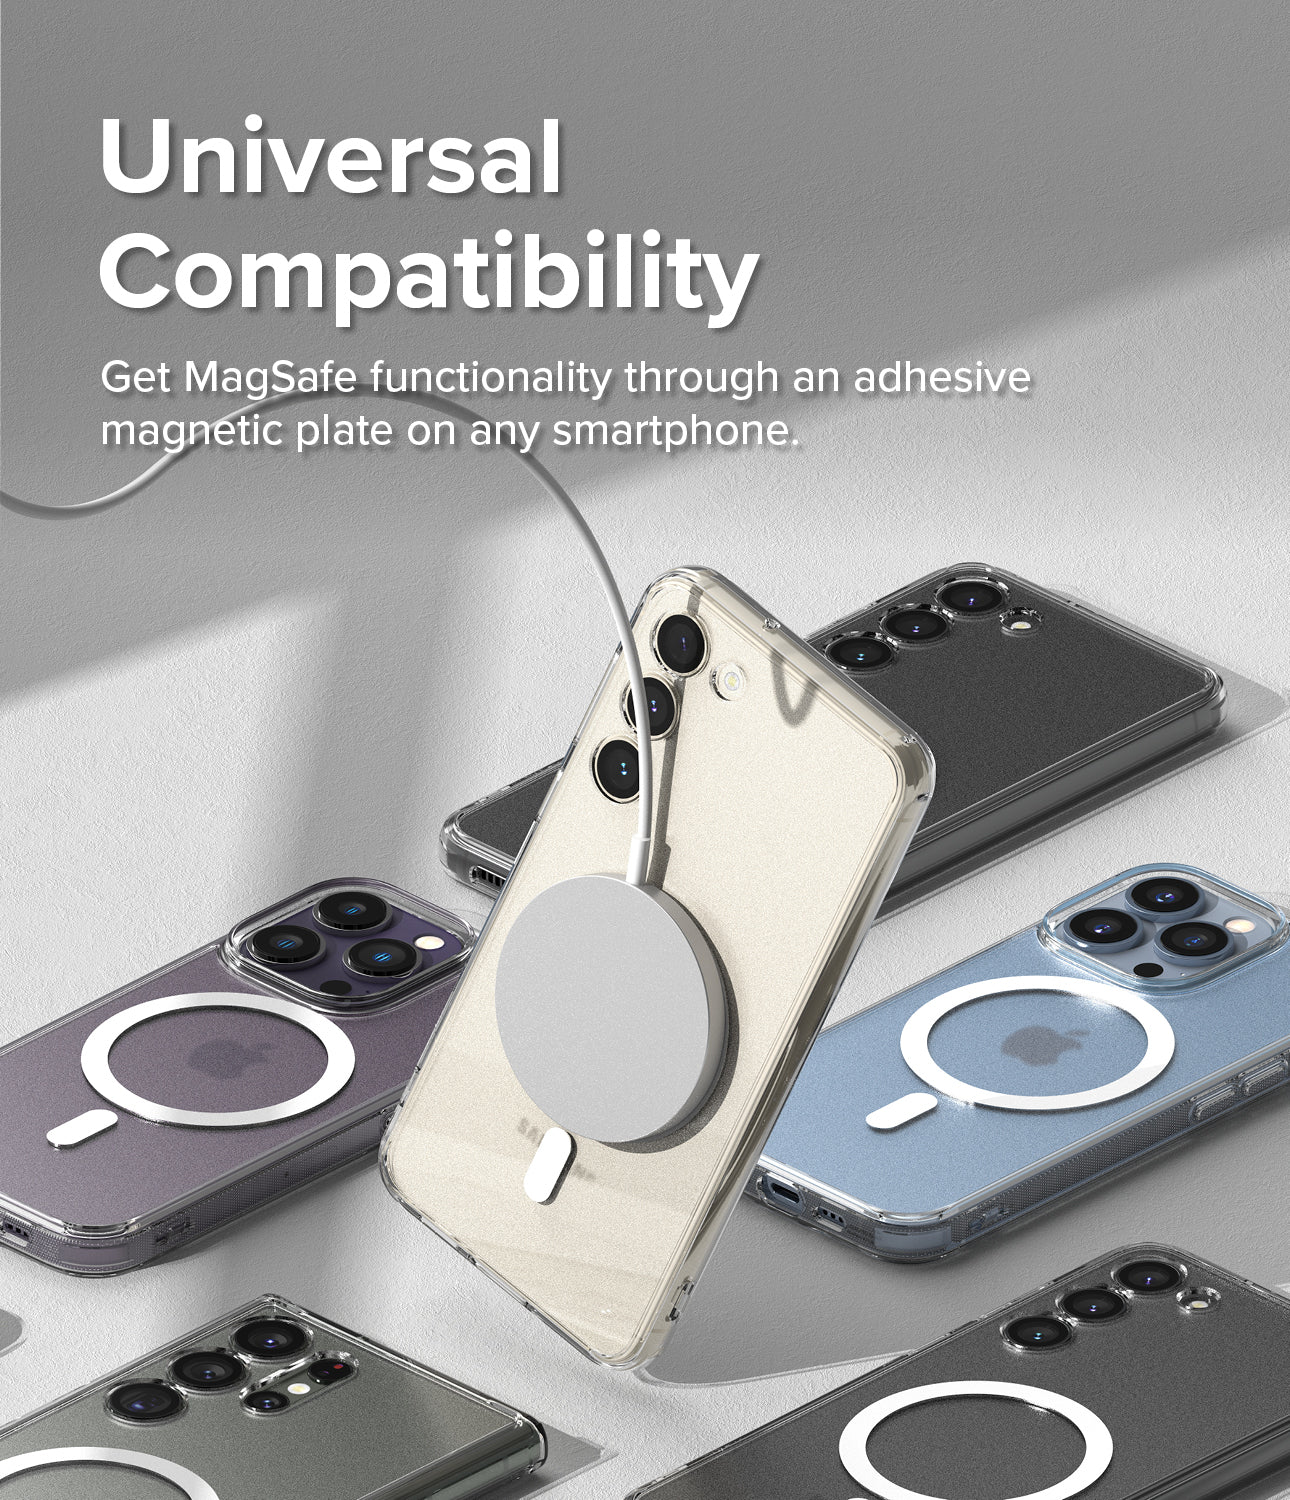 Universal Compatibility l Get MagSafe functionality through an adhesive magnetic plate on any smartphone